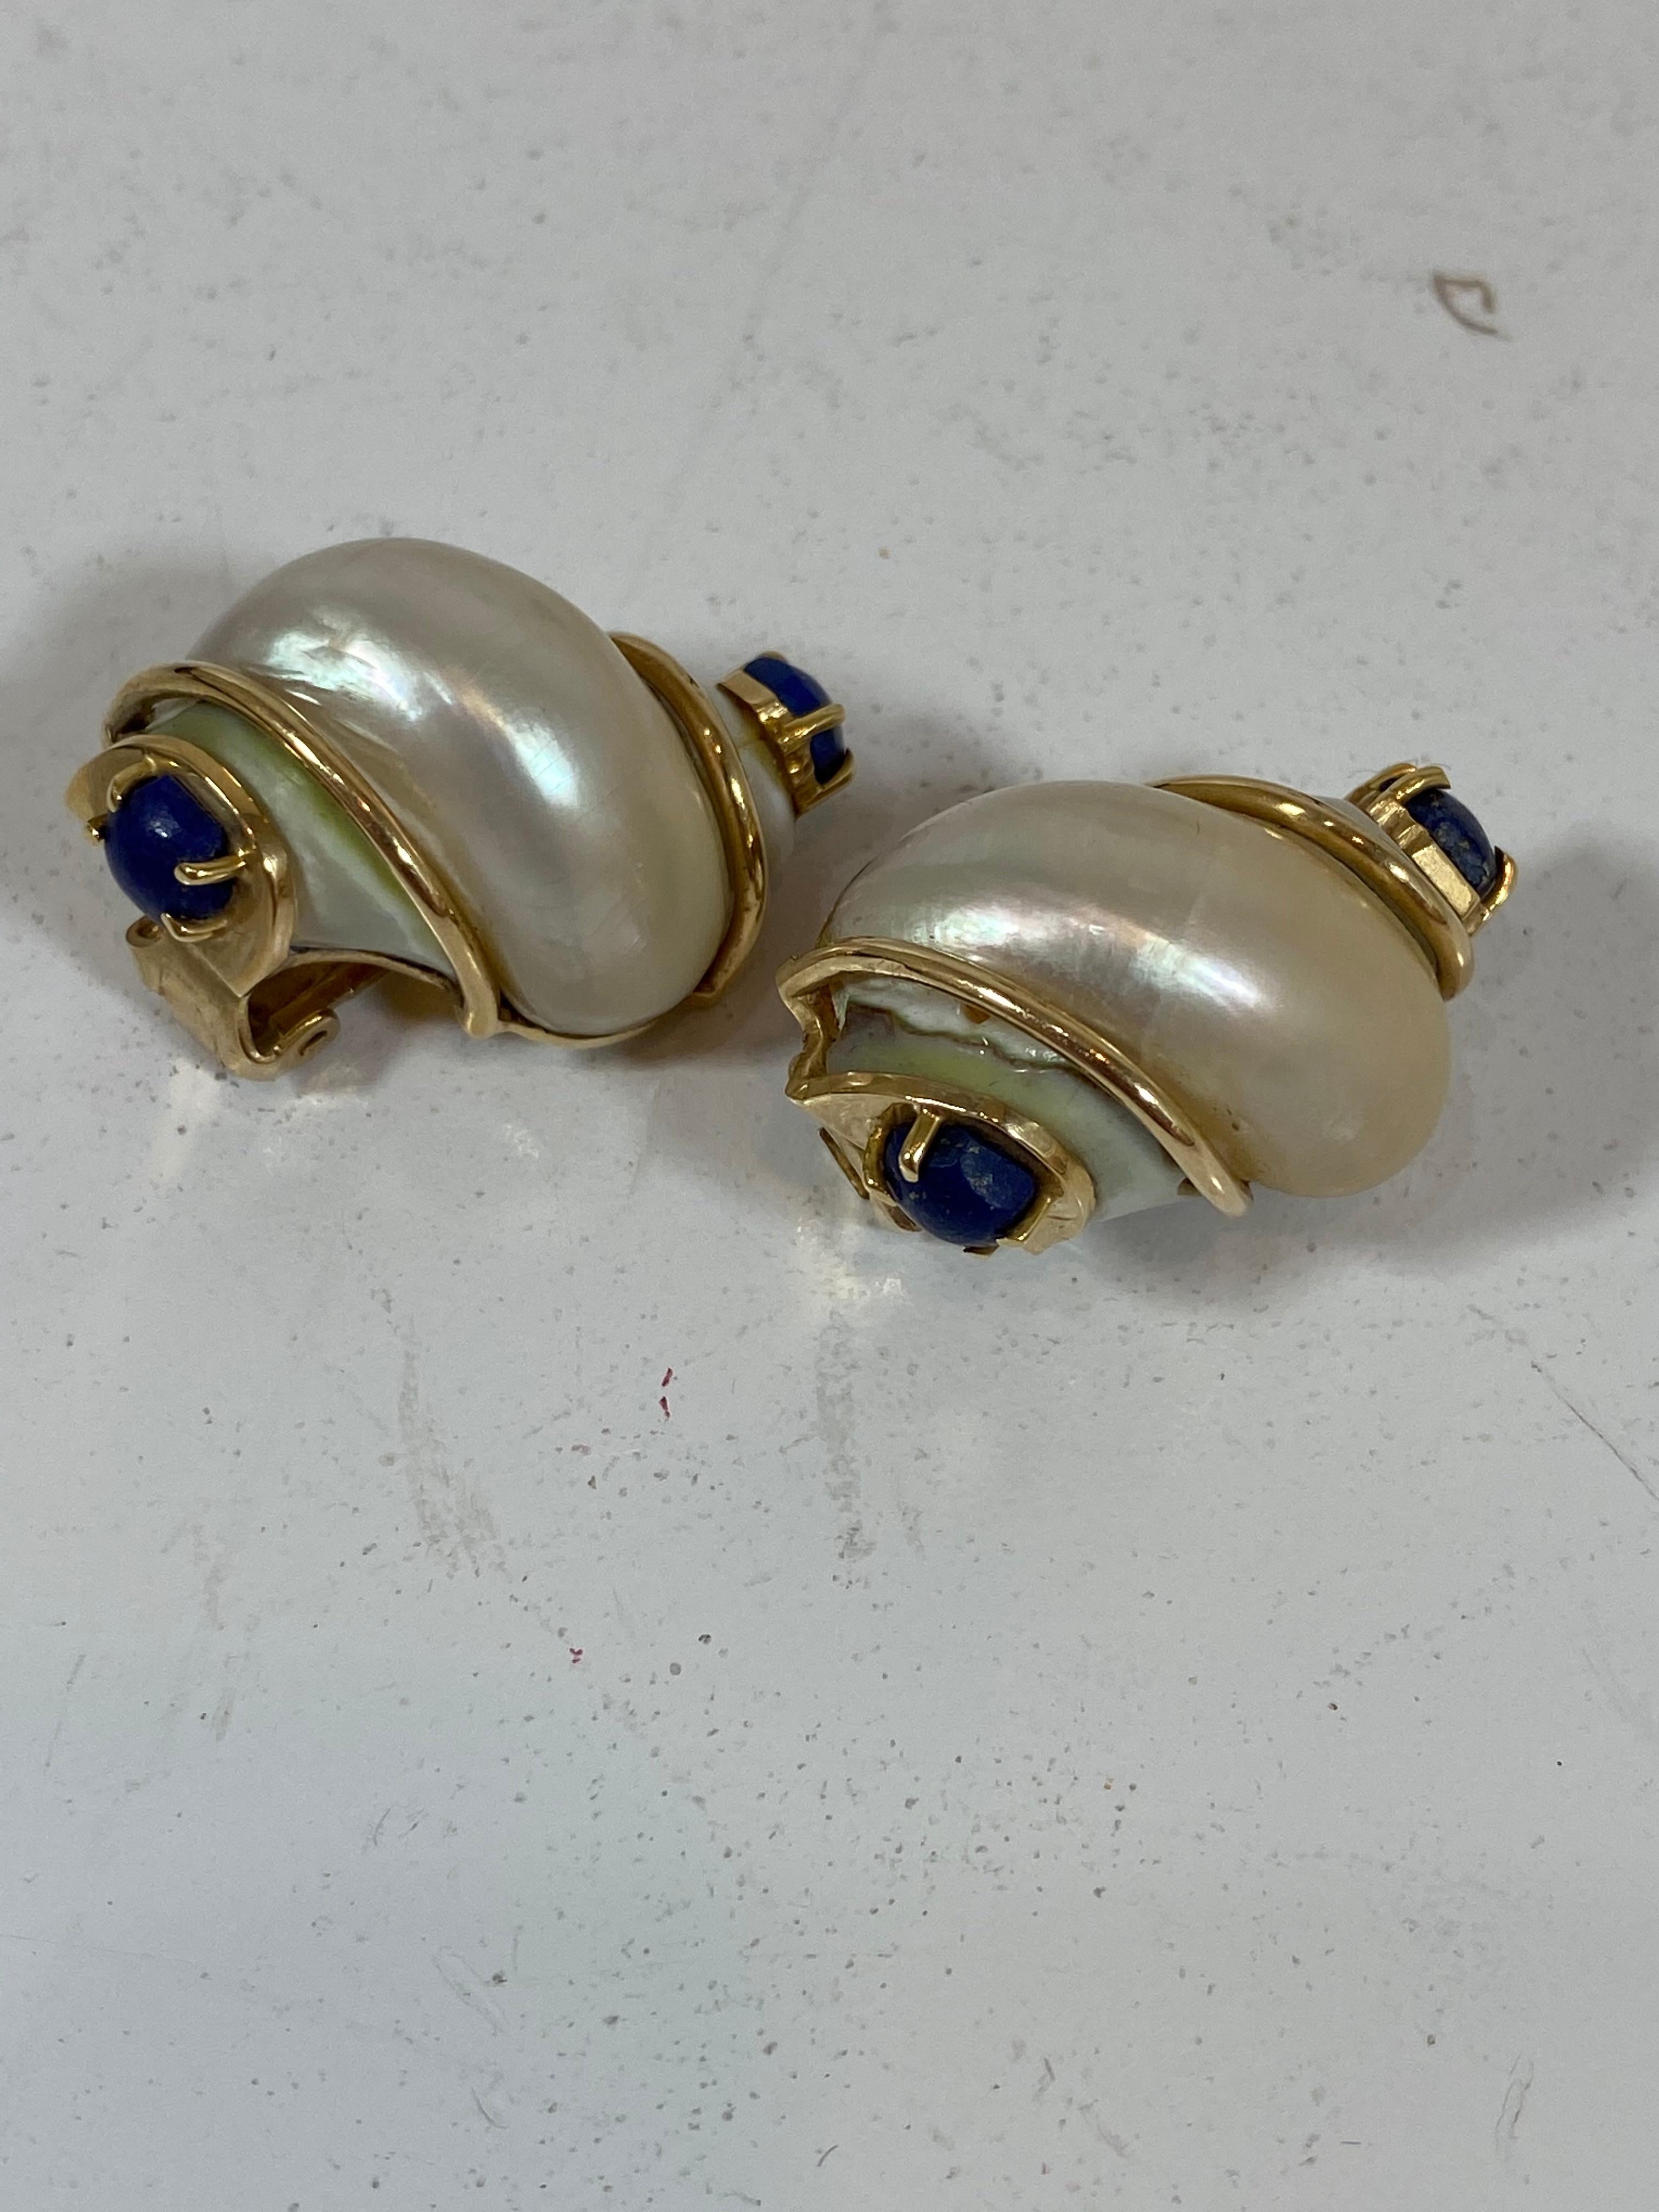 Rare and exquisite Seaman Schepps vintage earrings, dating back to the 1940's and with a patent pending stamp, showcase a real Turbo shell on 14k yellow gold. Shells have a small round cut prong set lapis stone at the top and bottom of each.